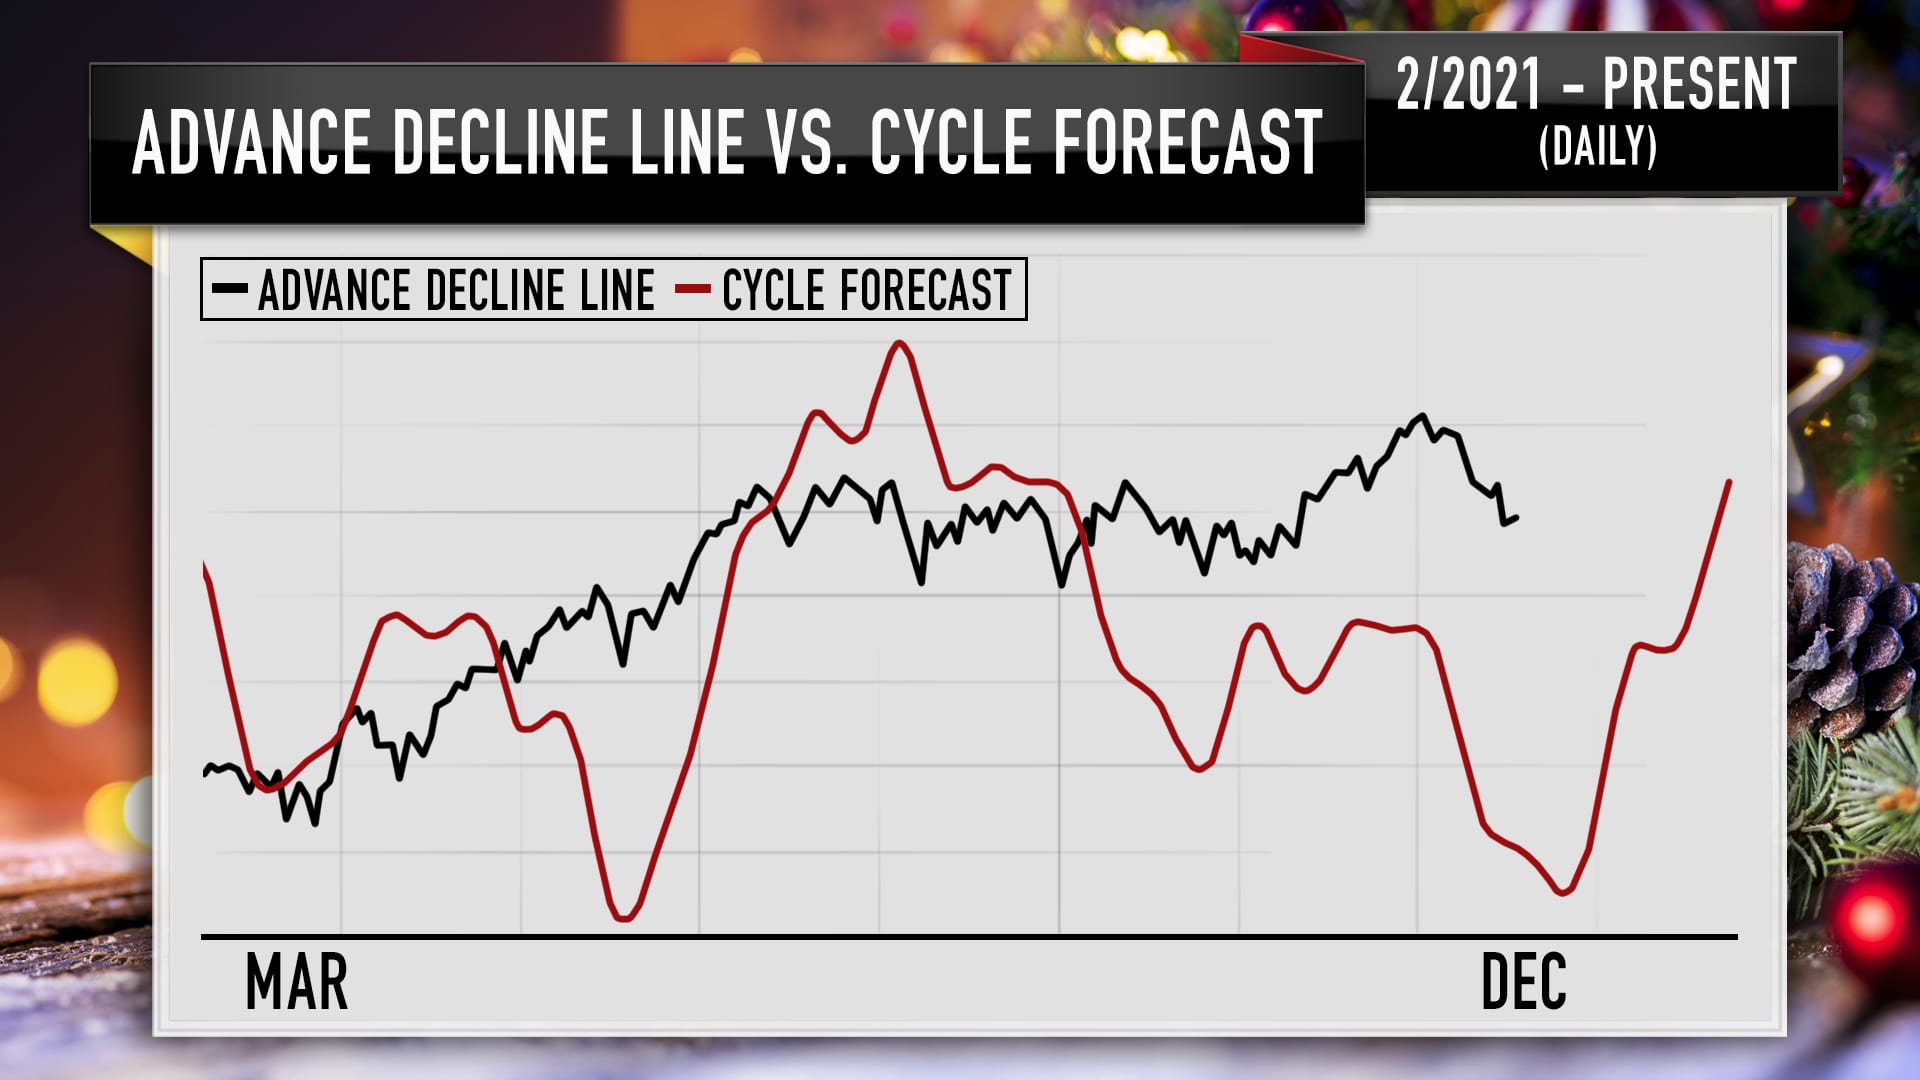 S&P 500's advance-decline line, according to technical analysis from Larry Williams.